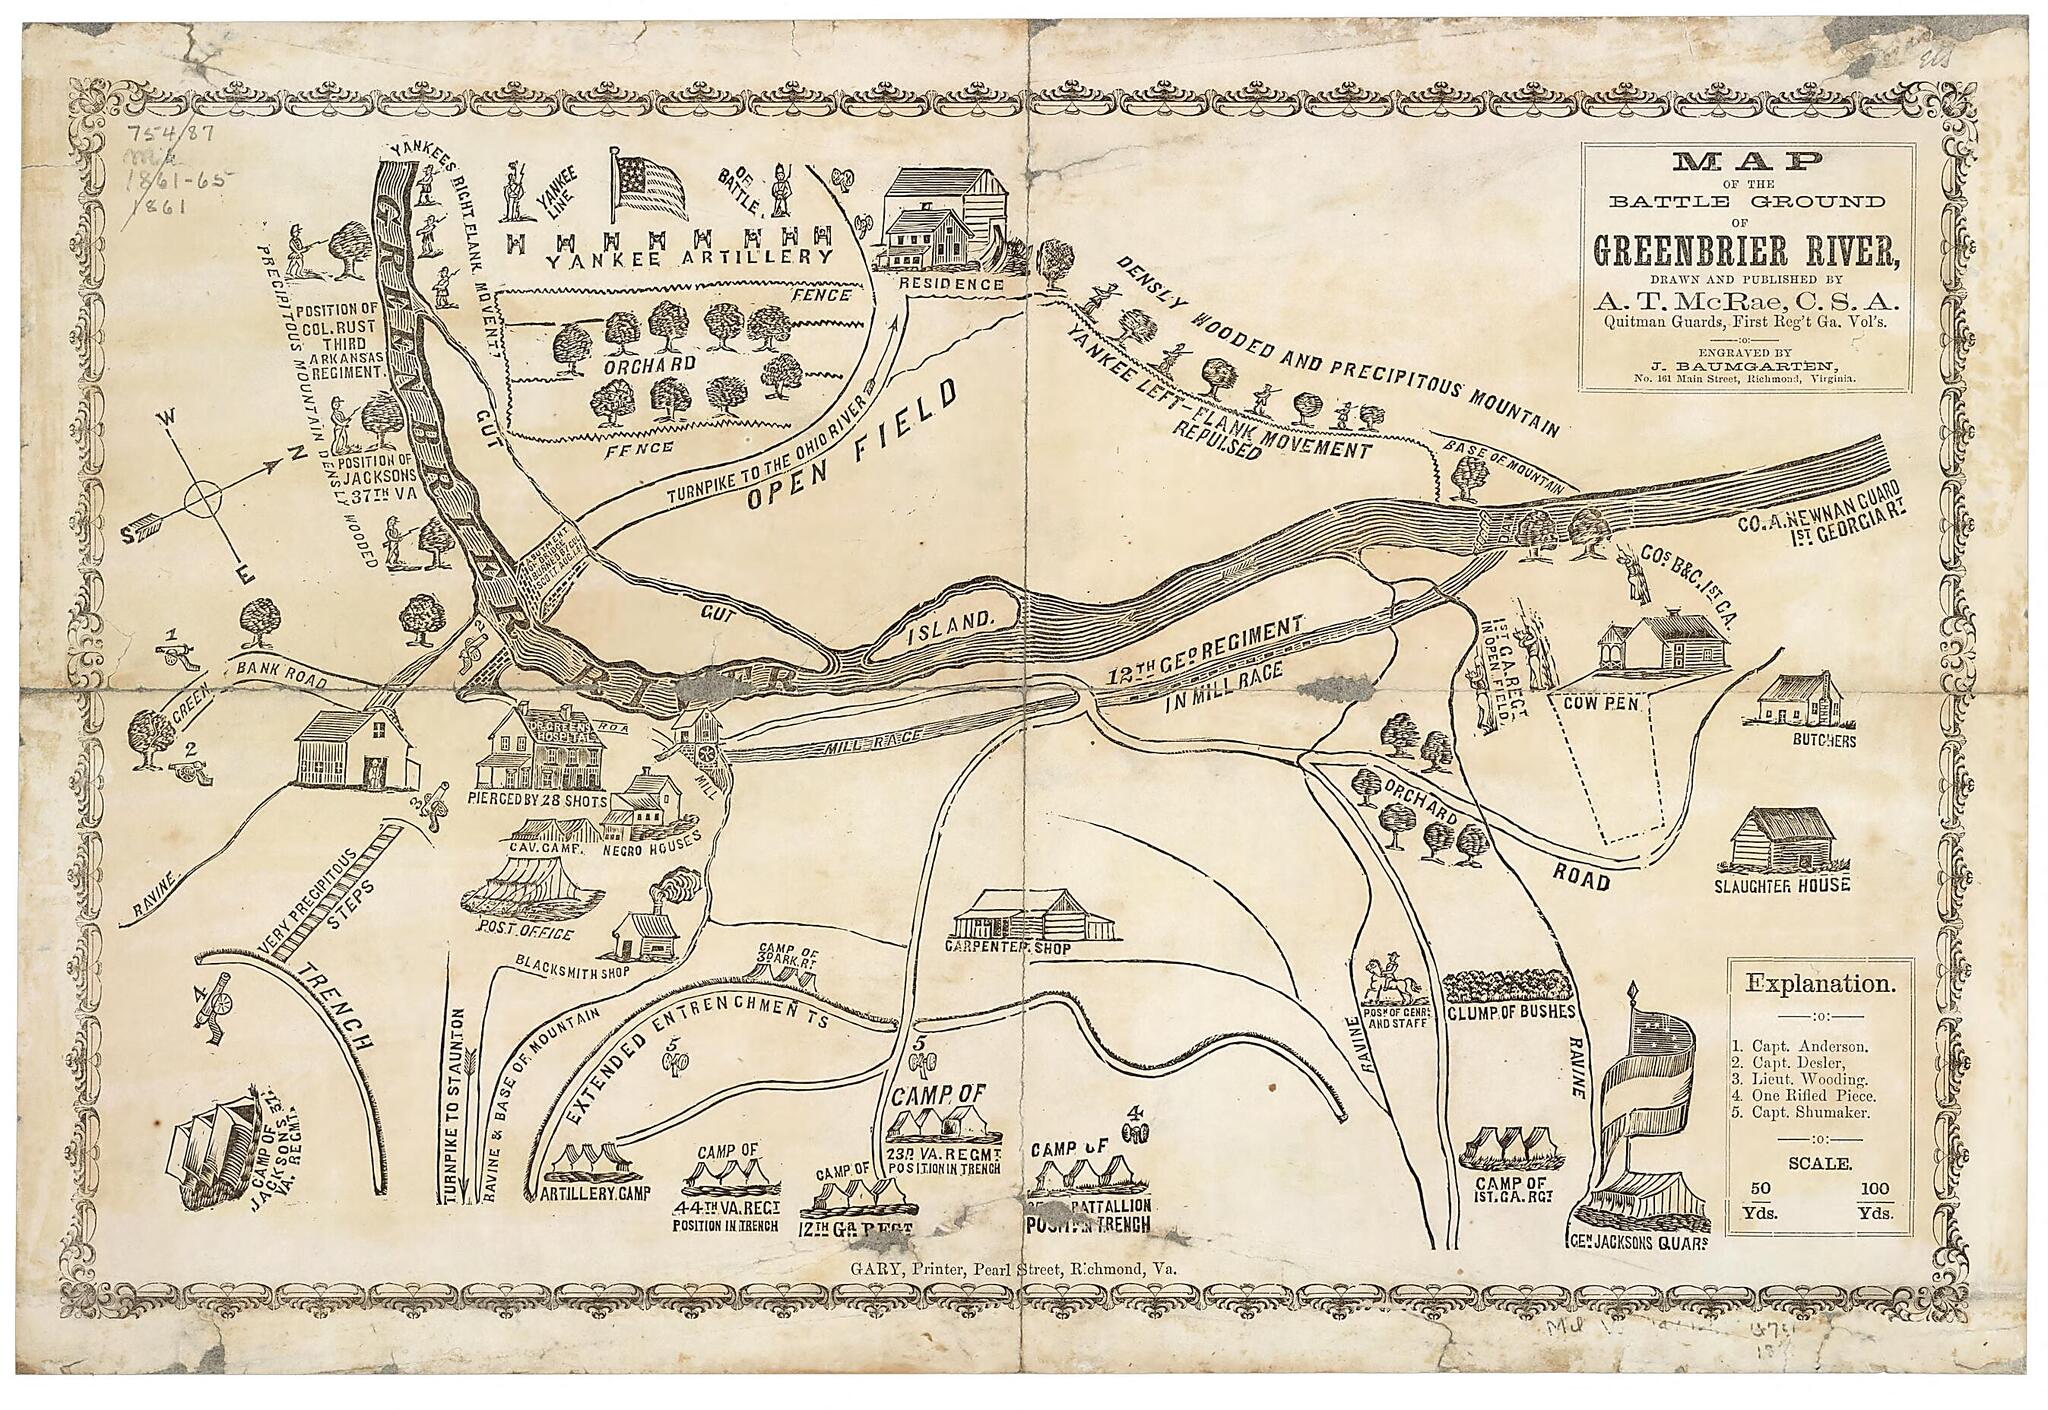 This old map of Map of the Battle Ground of Greenbrier River from 1861 was created by J. Baumgarten,  Gary (Printer), A. T. McRae in 1861